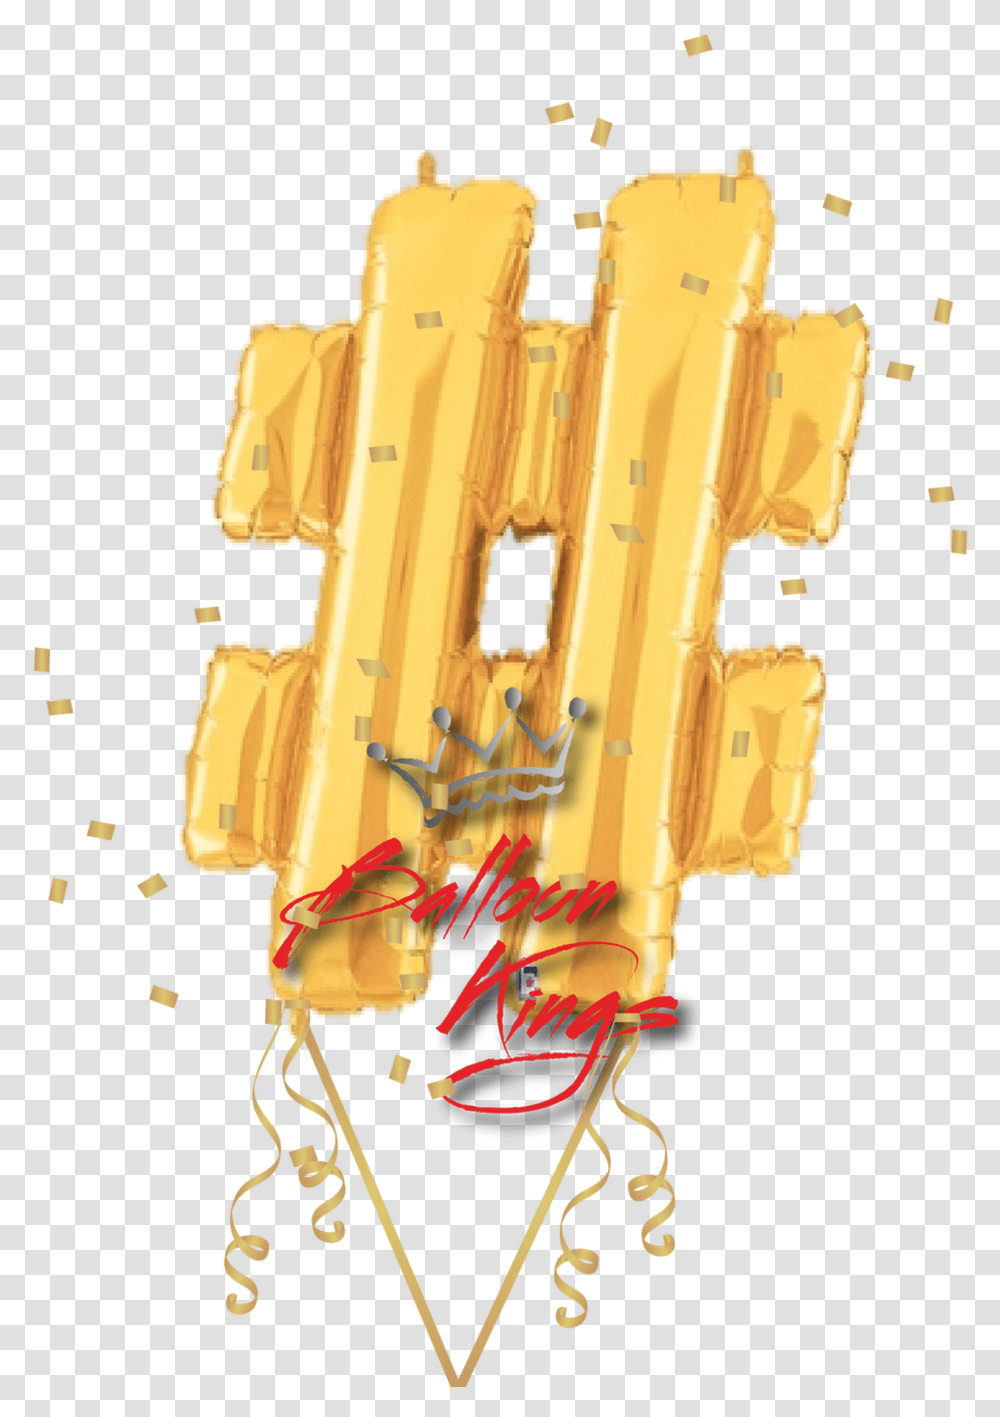 Gold Symbol Hashtag Balloon, Weapon, Weaponry, Alphabet Transparent Png